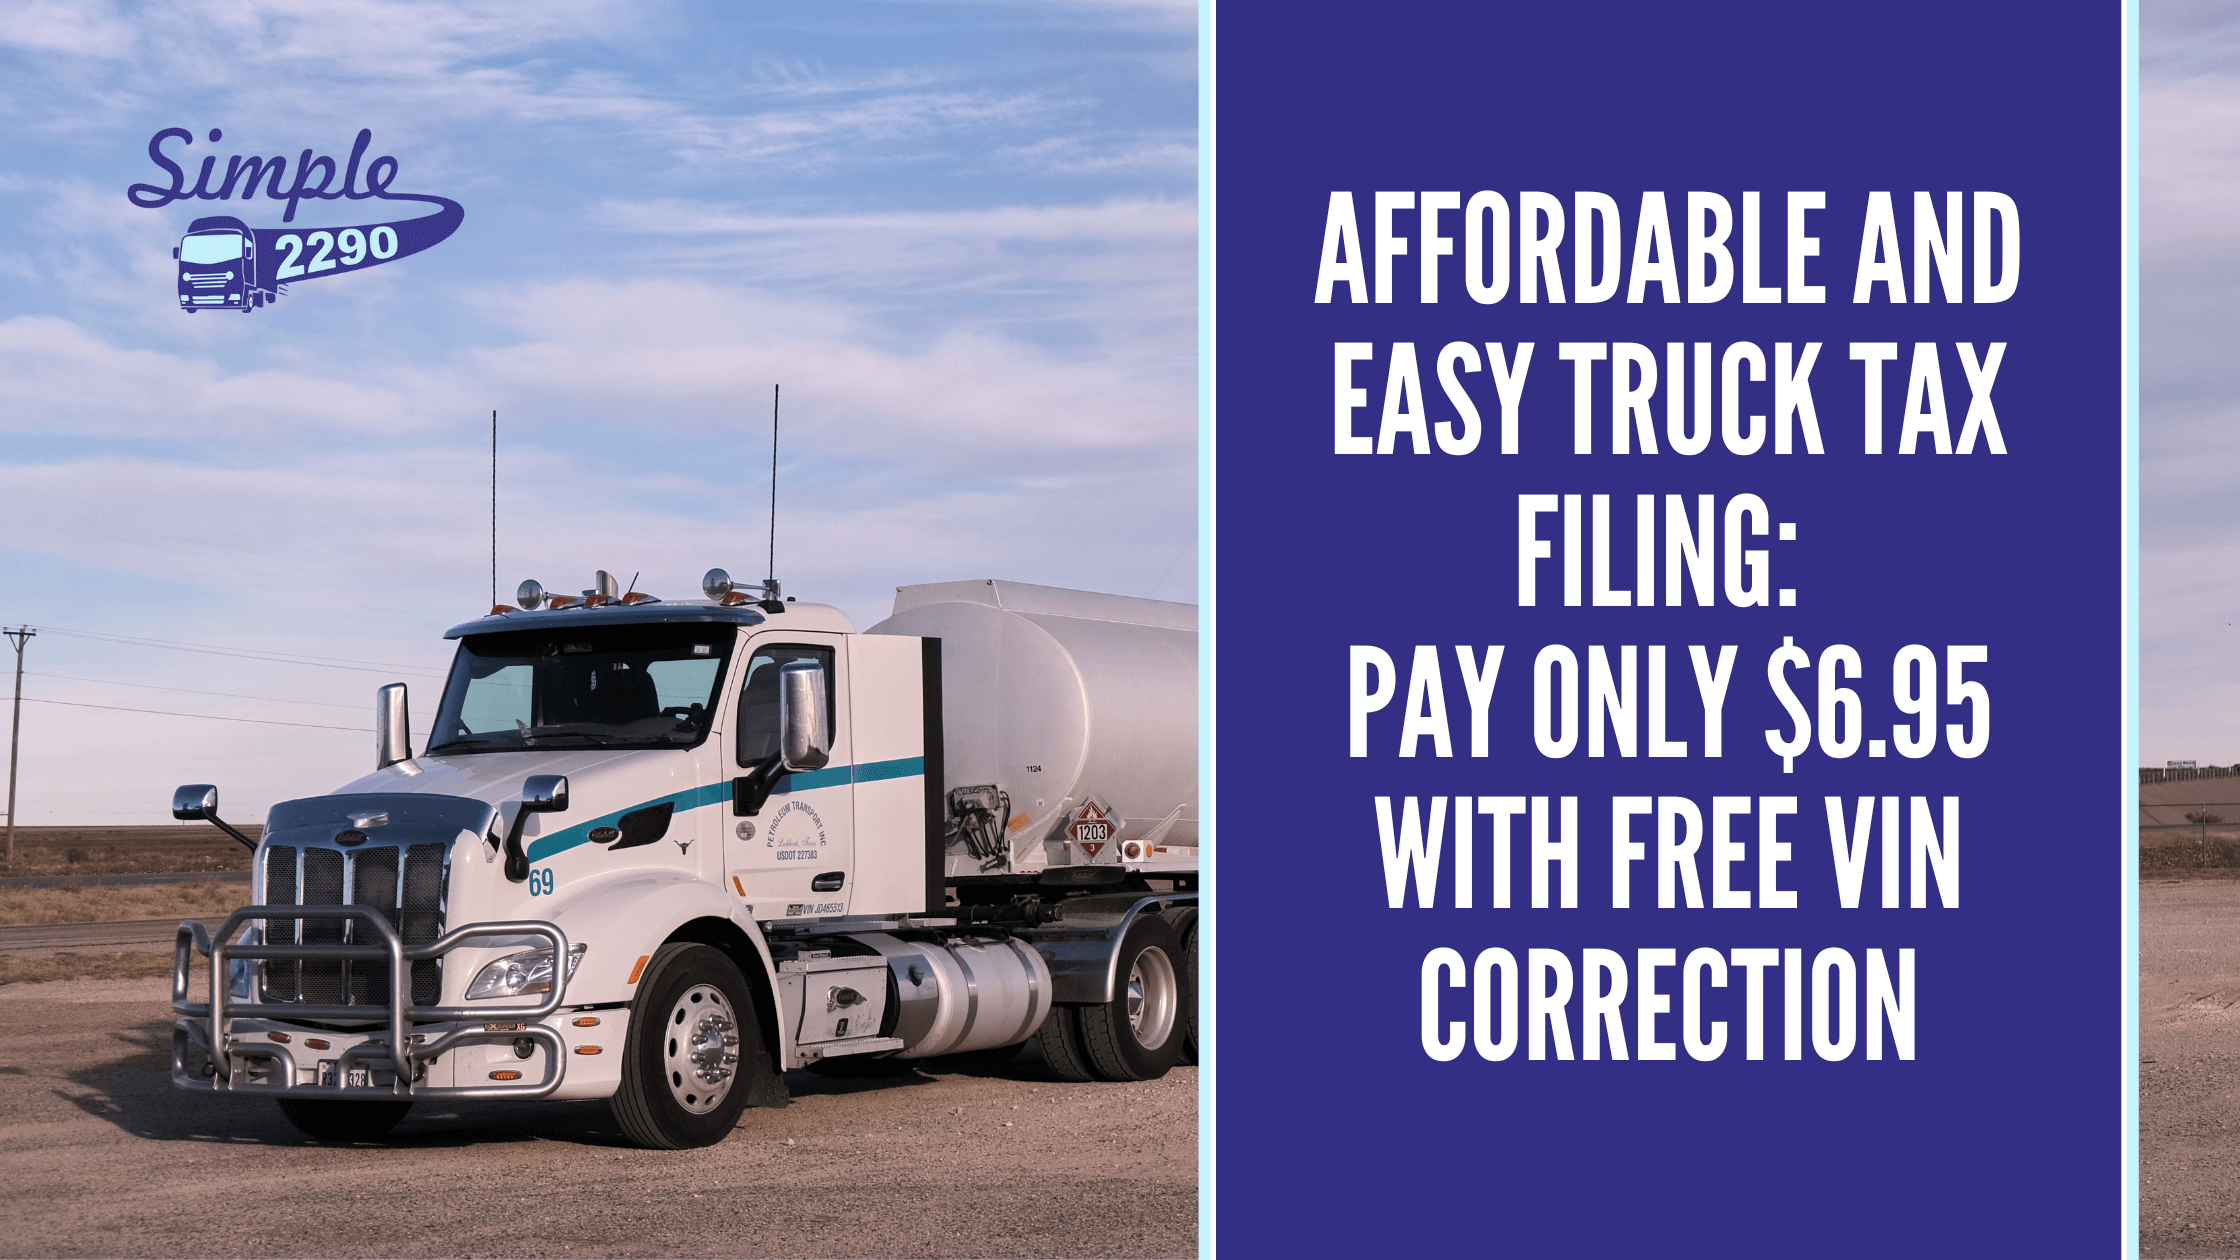 Affordable and Easy Truck Tax Filing: Pay Only $6.95 with Free VIN Correction